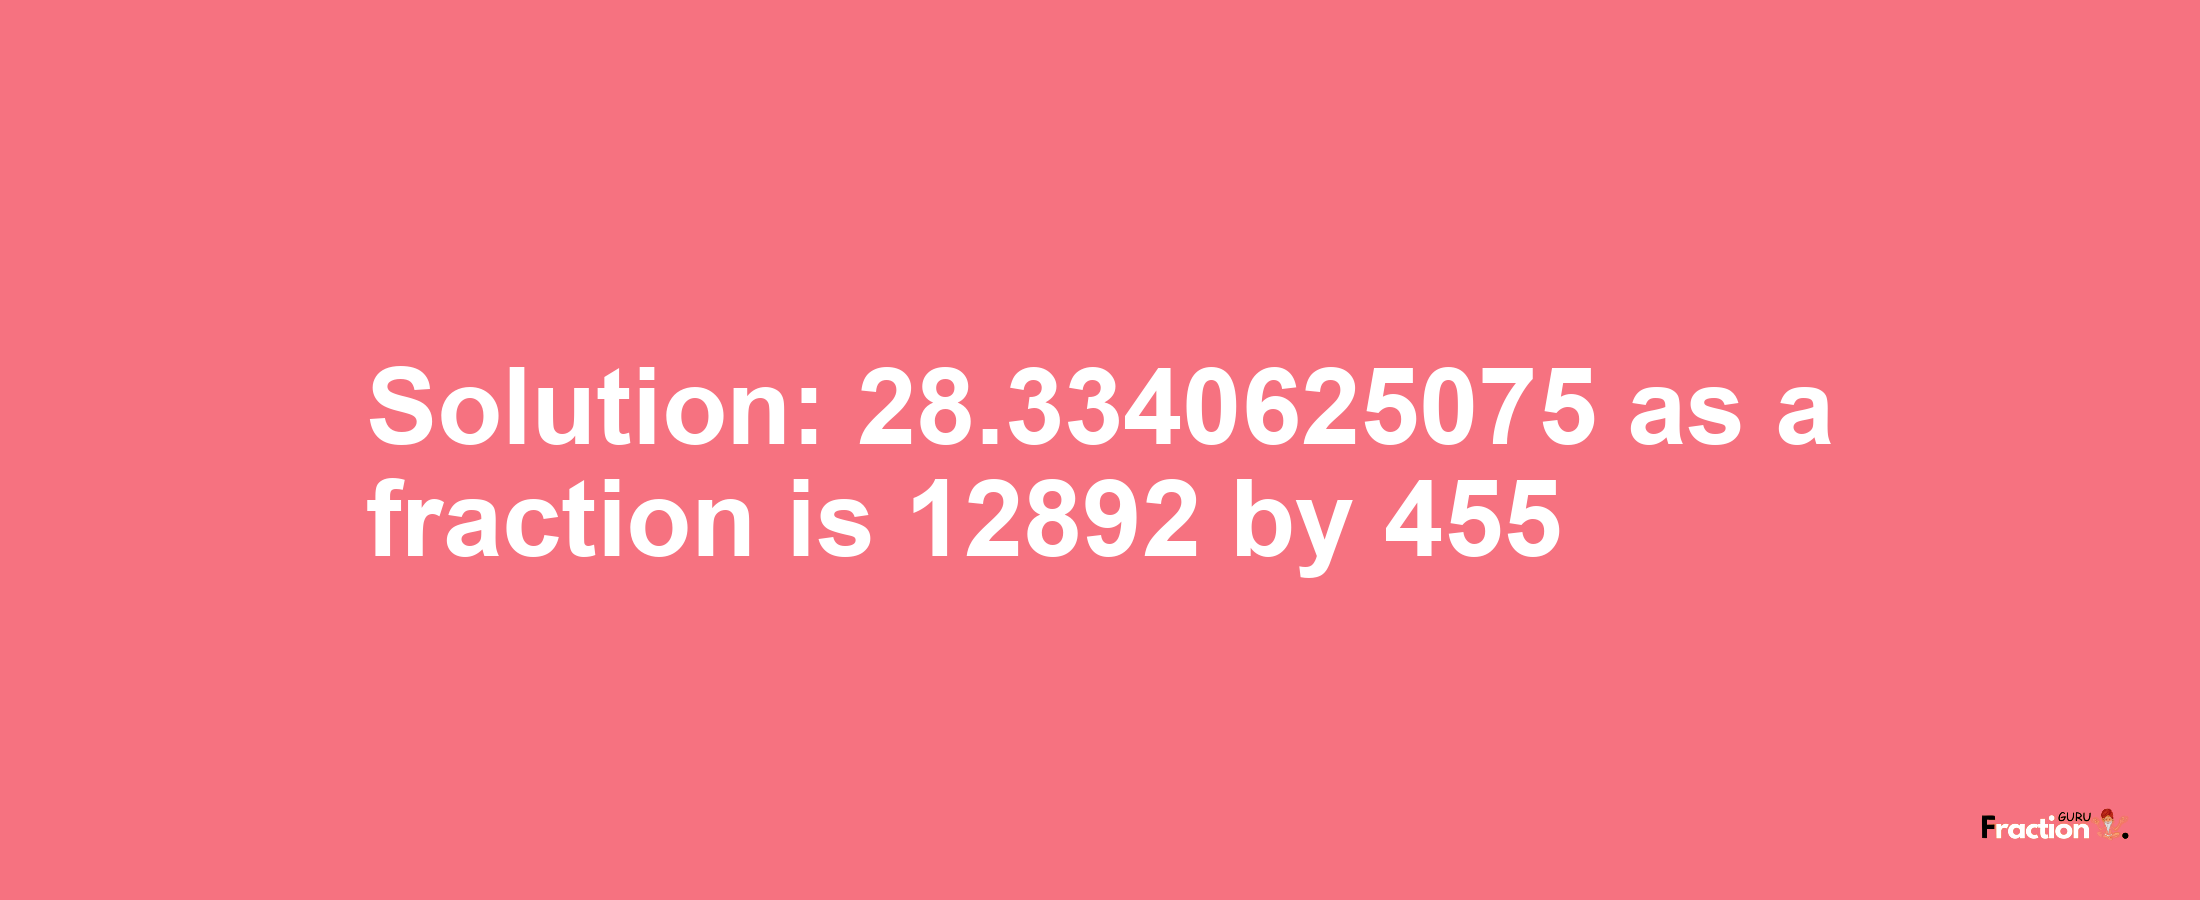 Solution:28.3340625075 as a fraction is 12892/455